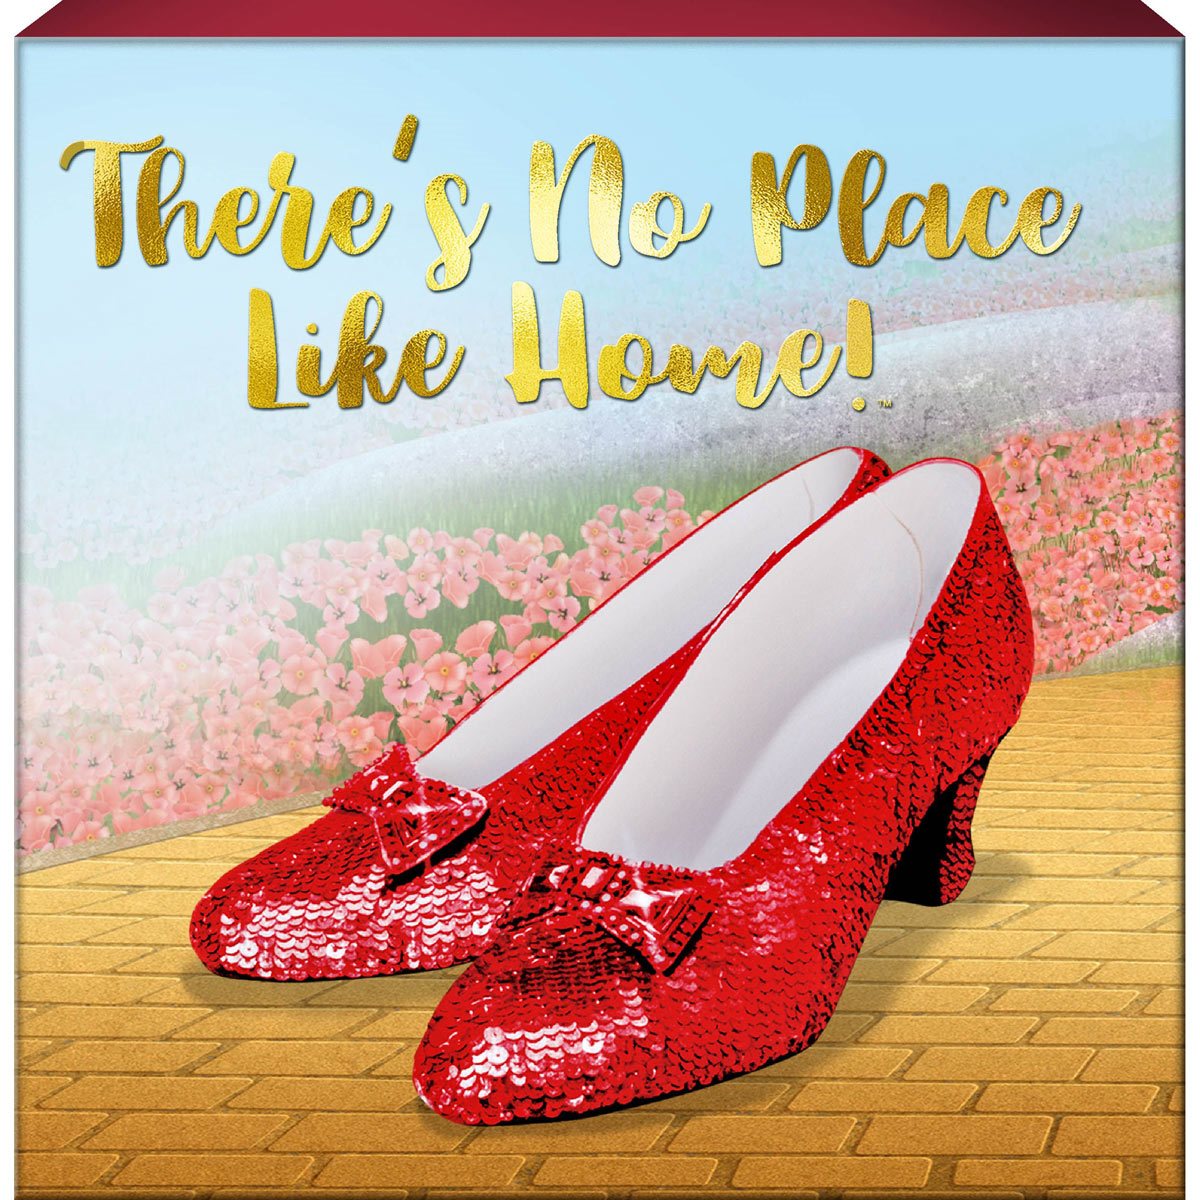 🔥 Replica of Judy Garland's Ruby Slippers in The Wizard of Oz 🔥 👀 | eBay